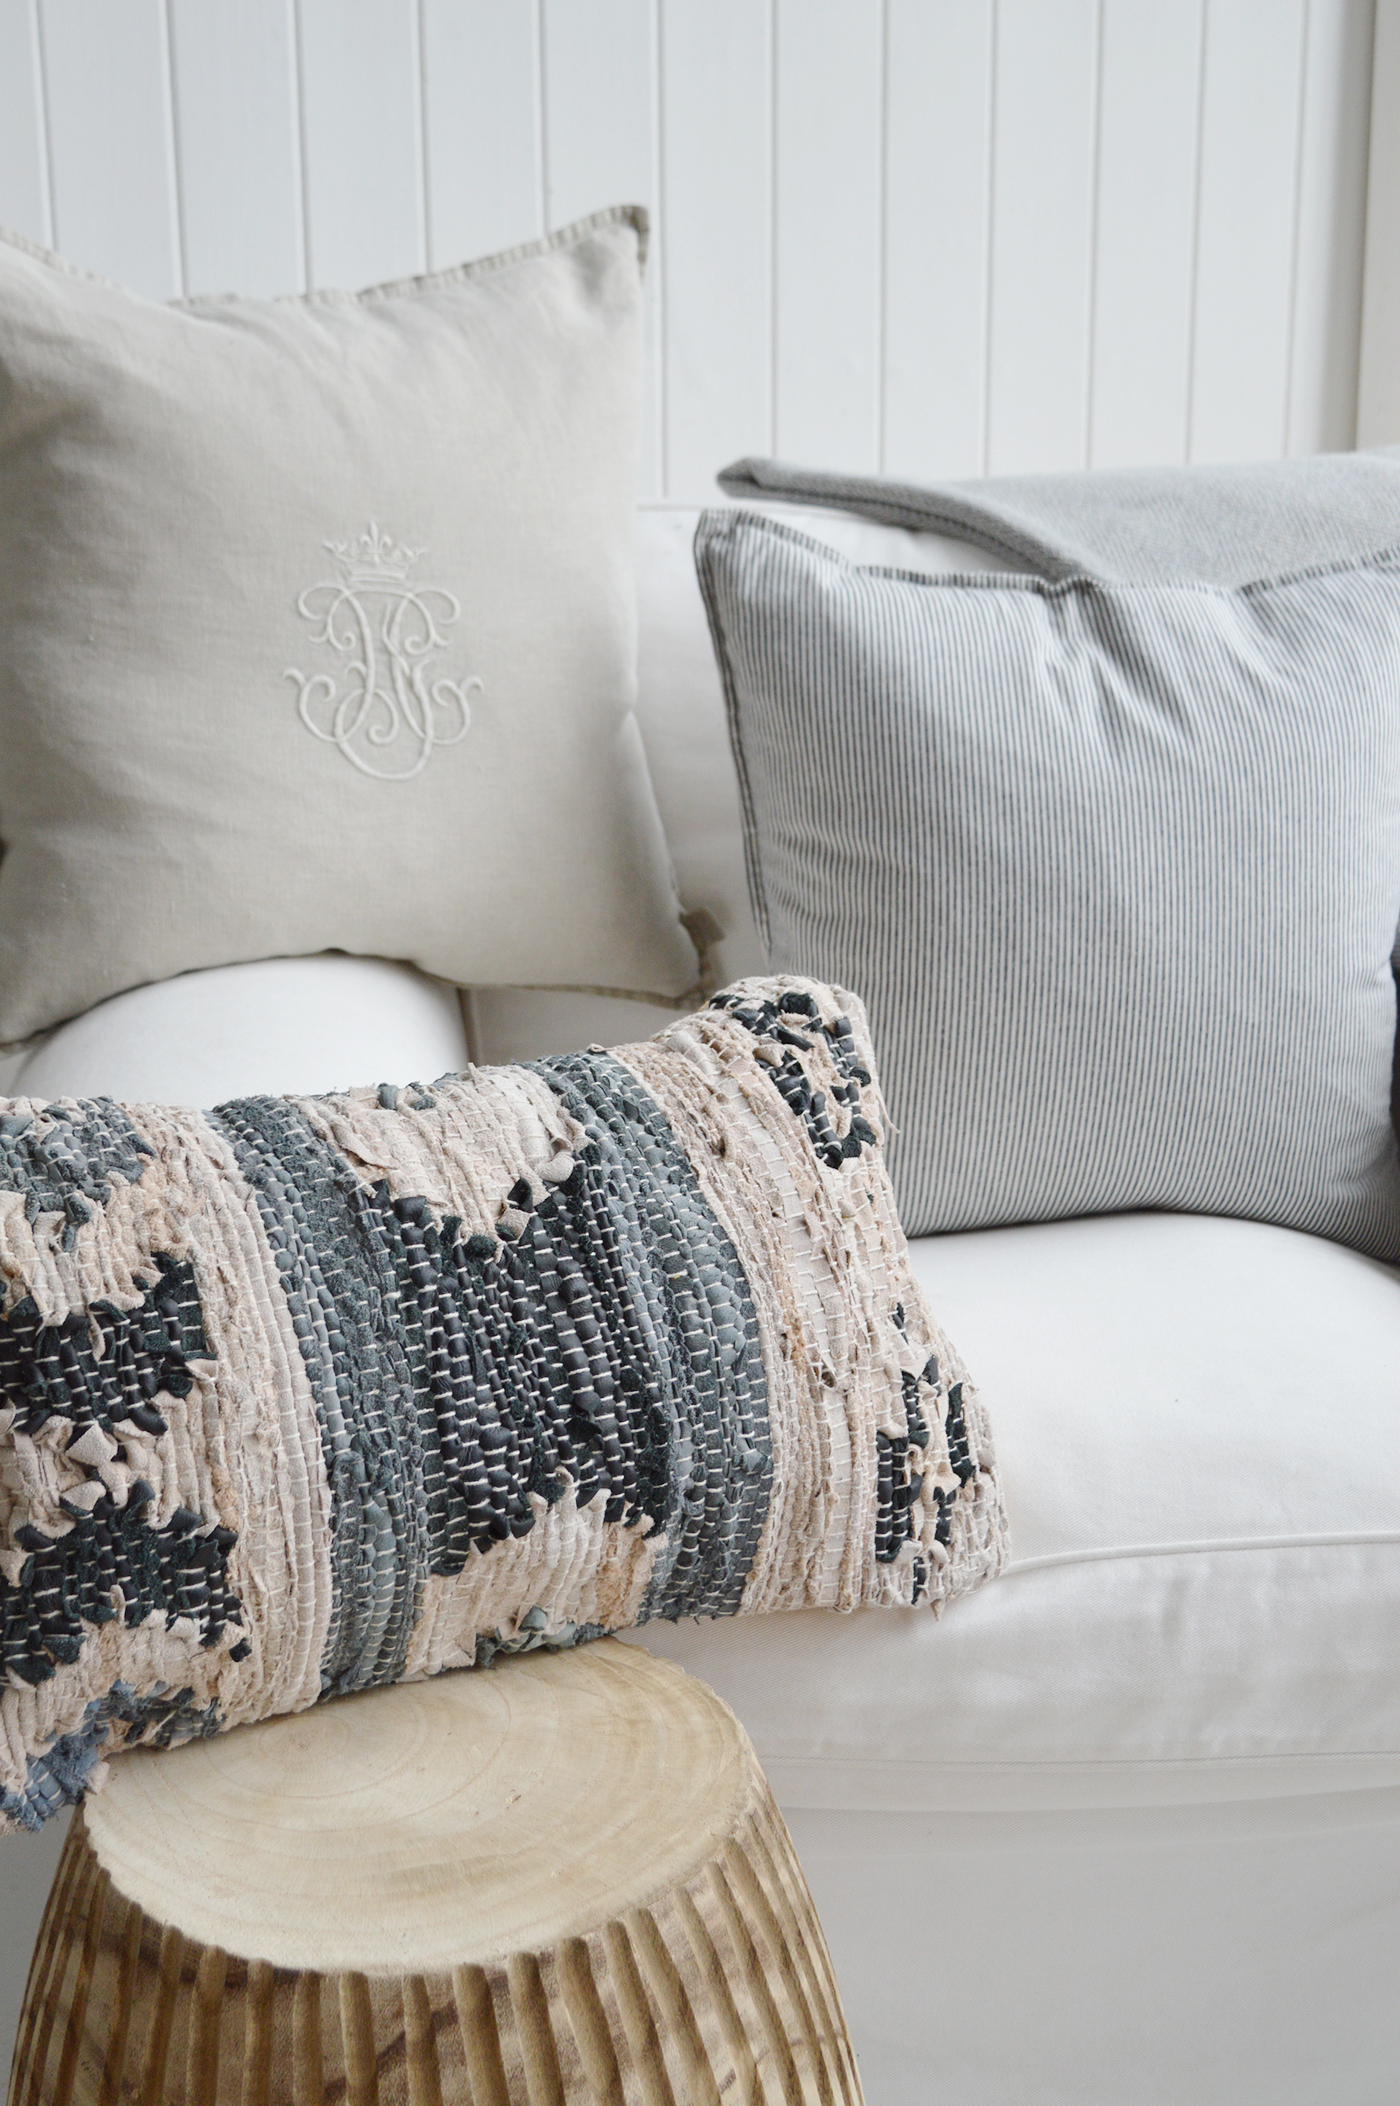 The Dalton cushion with the Rhode Island stripe and Richmond monogram in naturals, blues, and greys to suit a Hamptons Beach House inspired interior